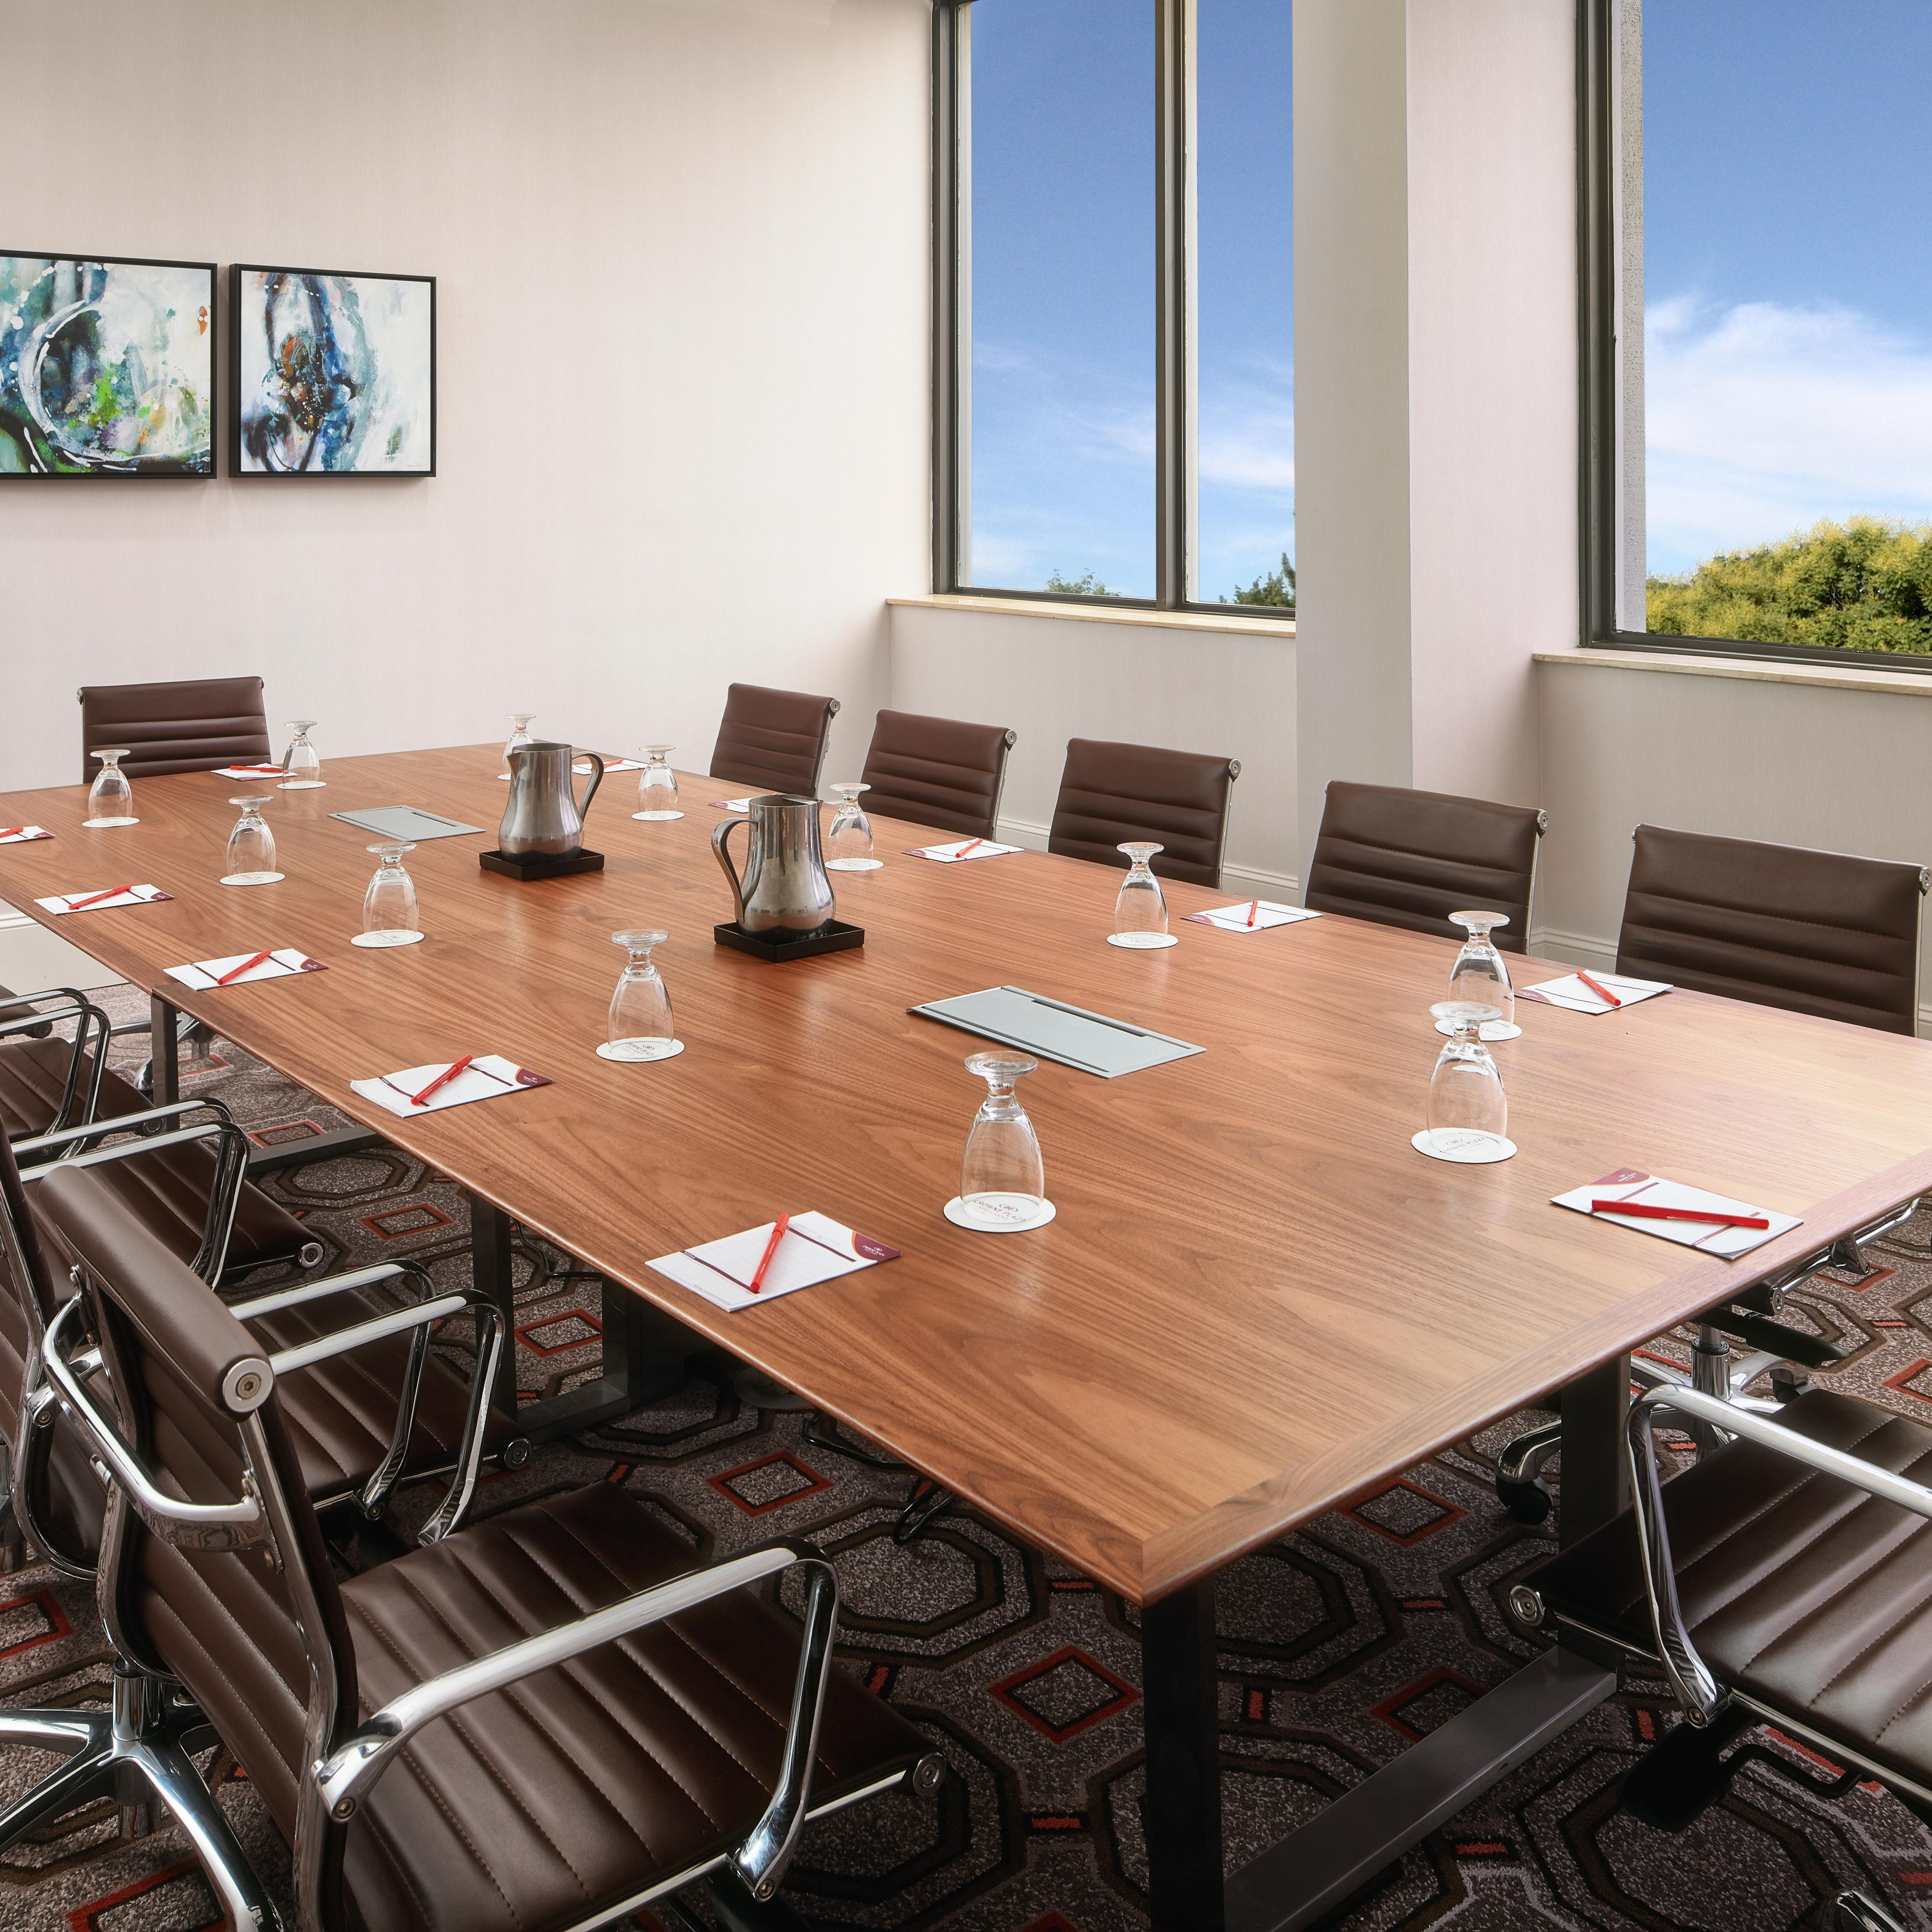 Our executive table and comfortable chairs are ideal for meetings.